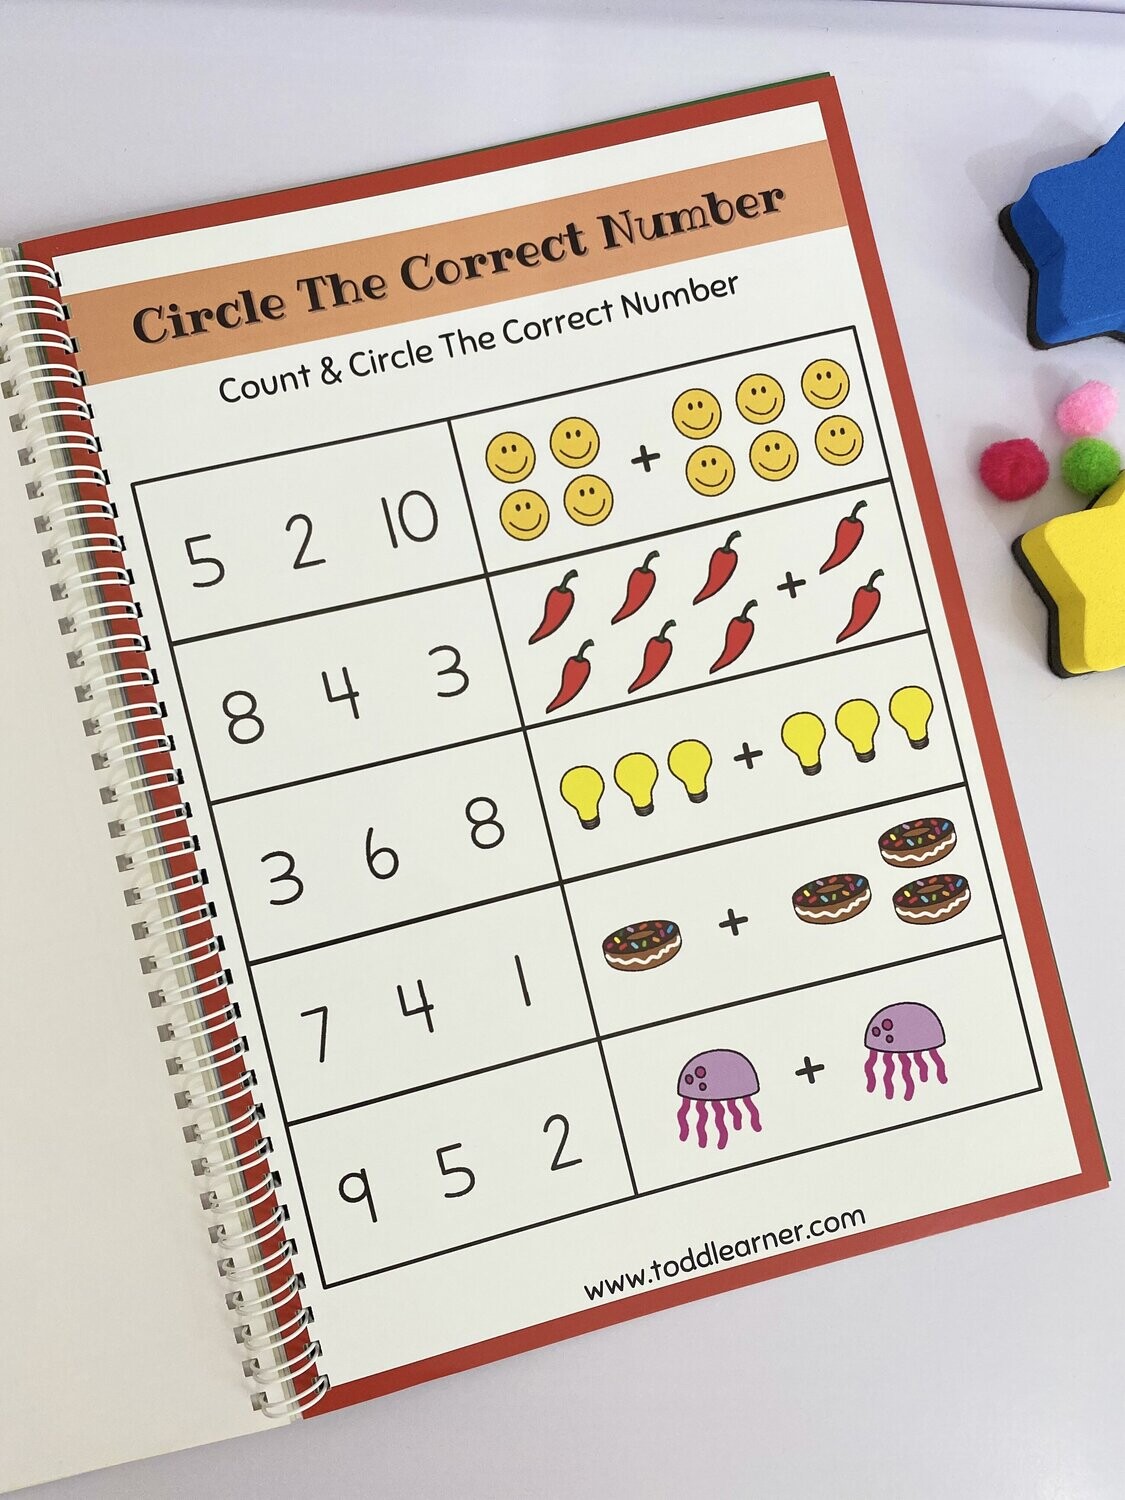 Rewritable Math Addition Practice Book for Kids.